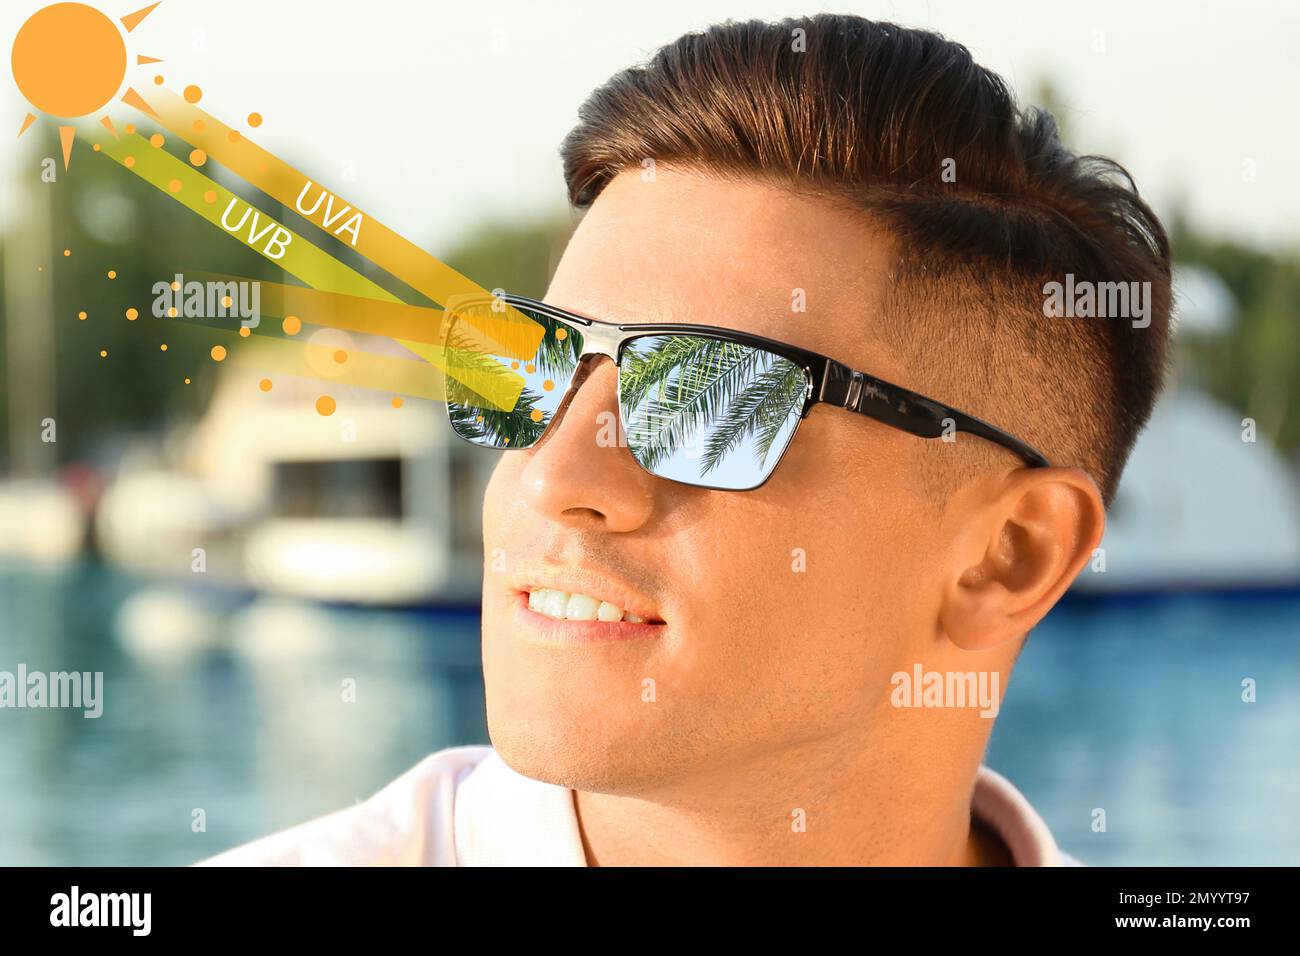 Man wearing sunglasses outdoors, closeup. UVA and UVB rays reflected by lenses, illustration Stock Photo